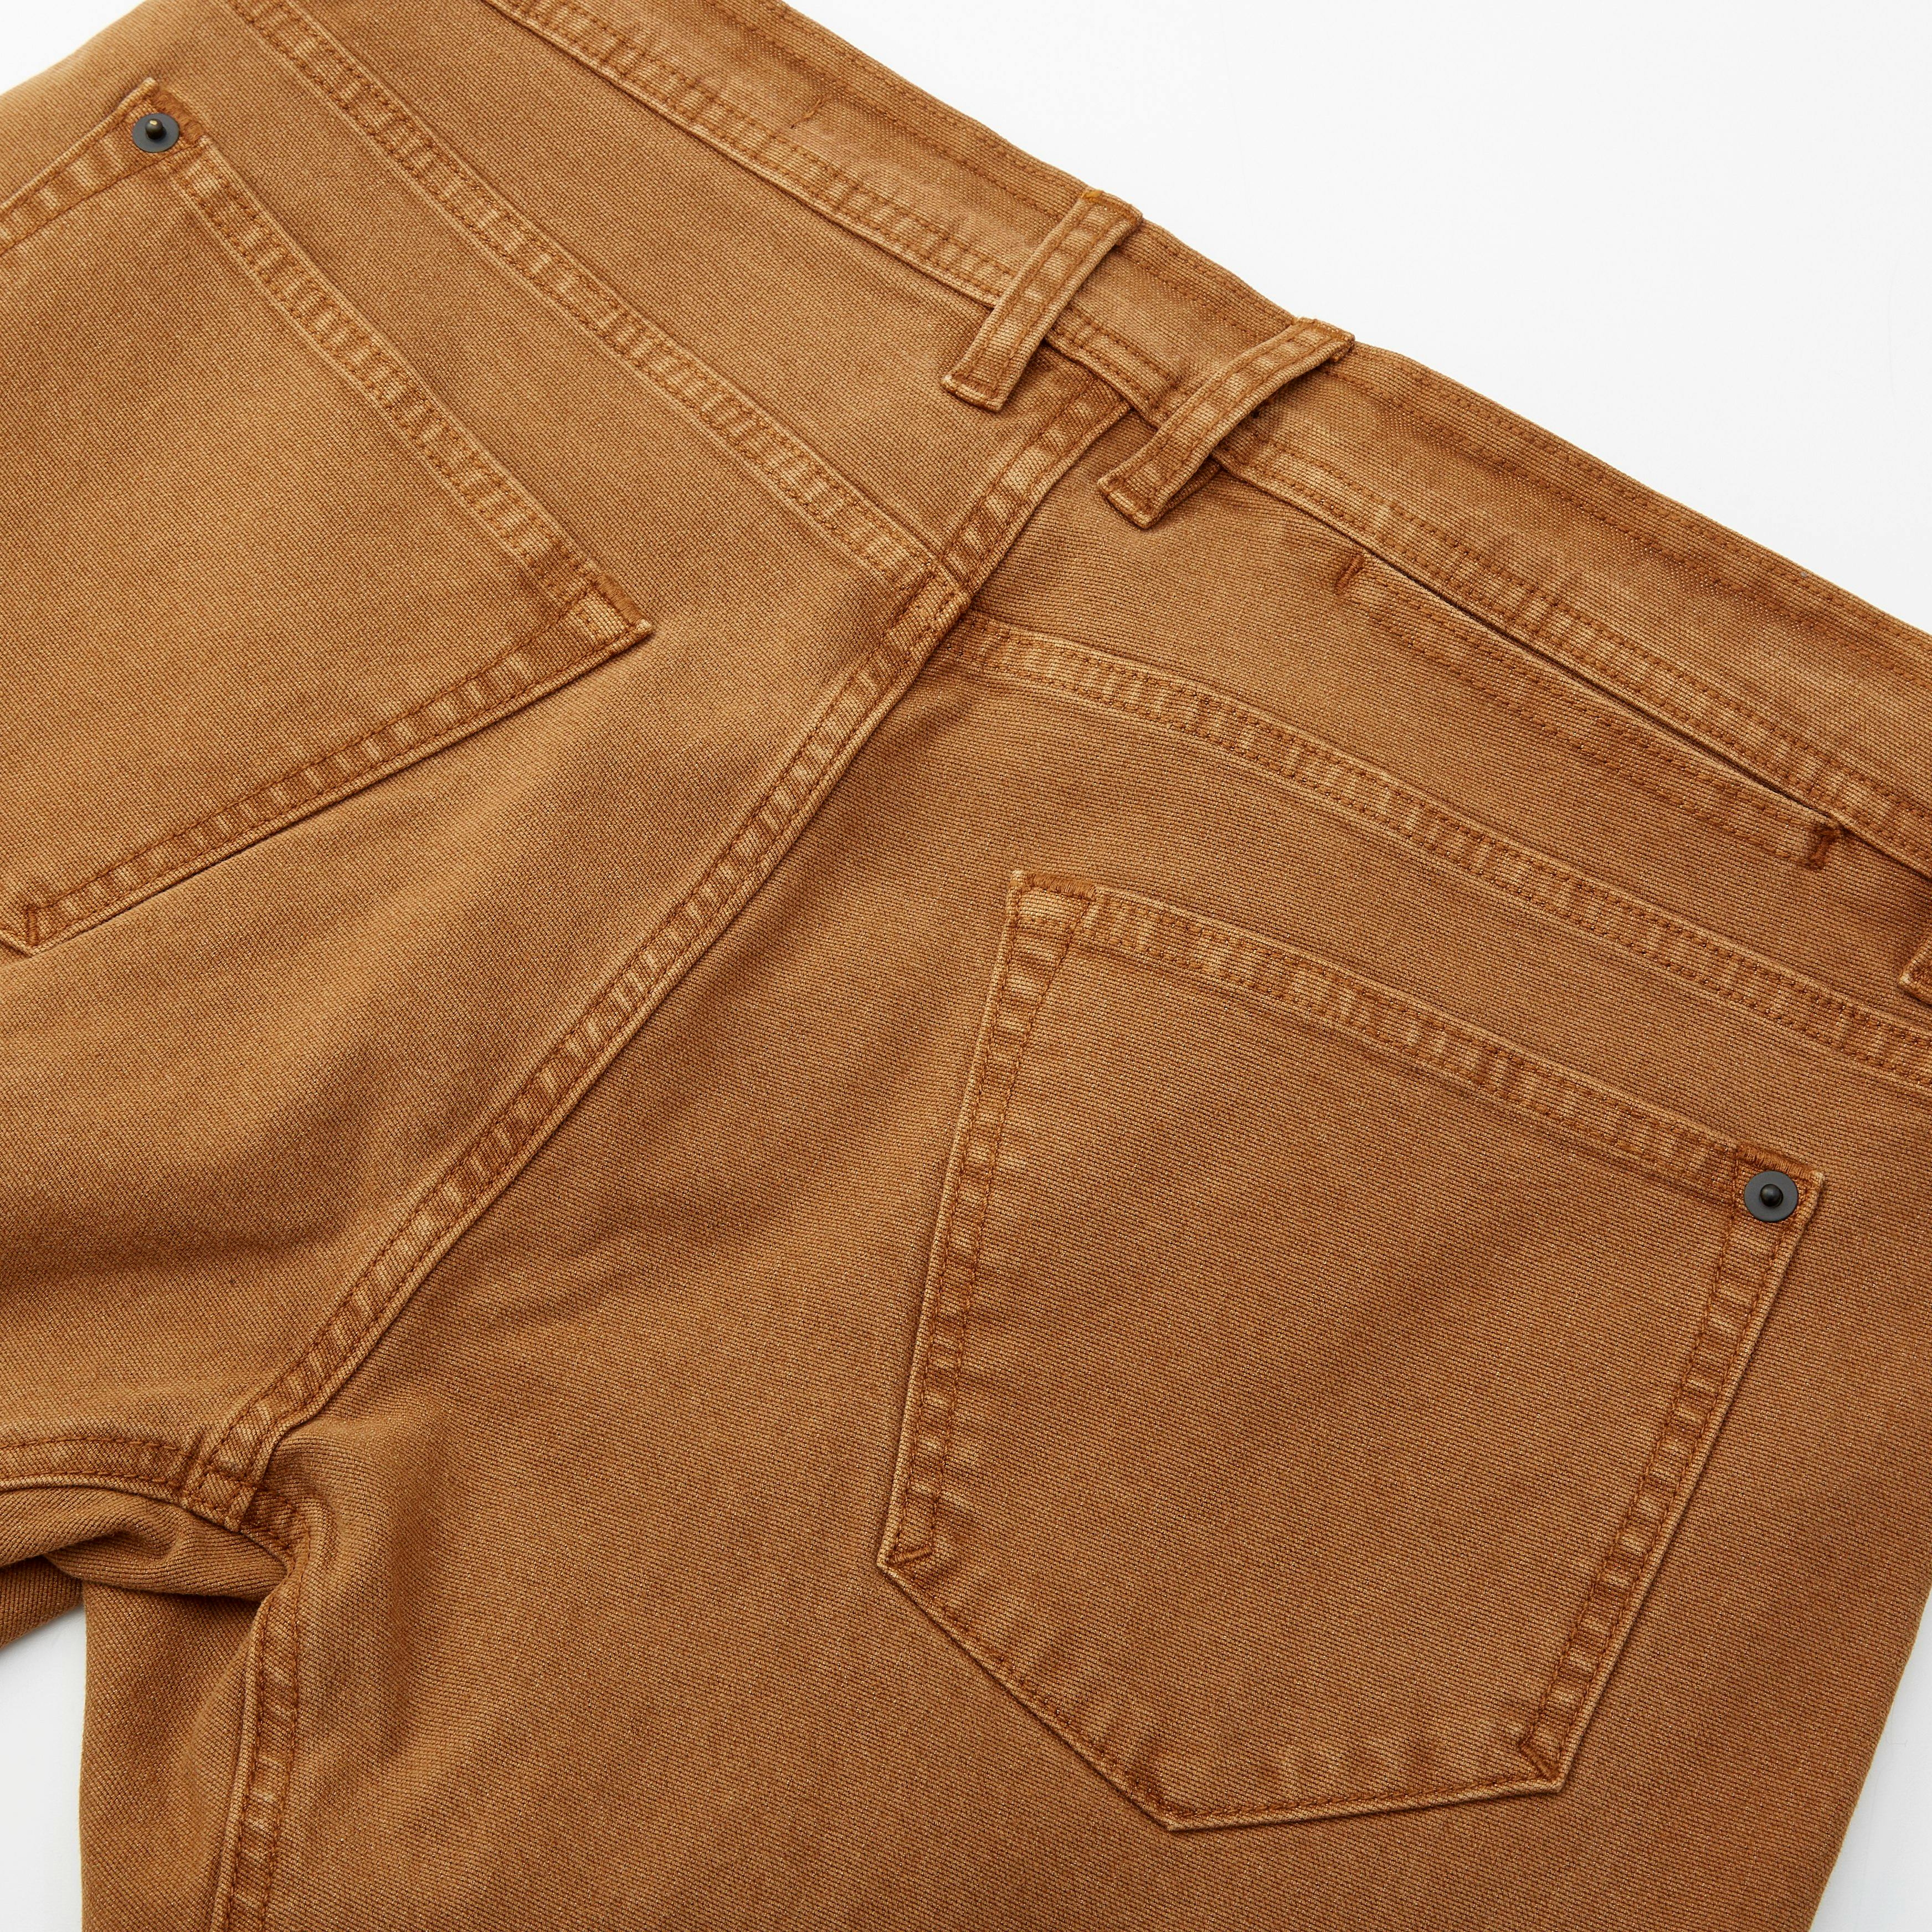 Slim Pant Canyon Pants - Proof Double-Knee Work - Huckberry Work | Rover |